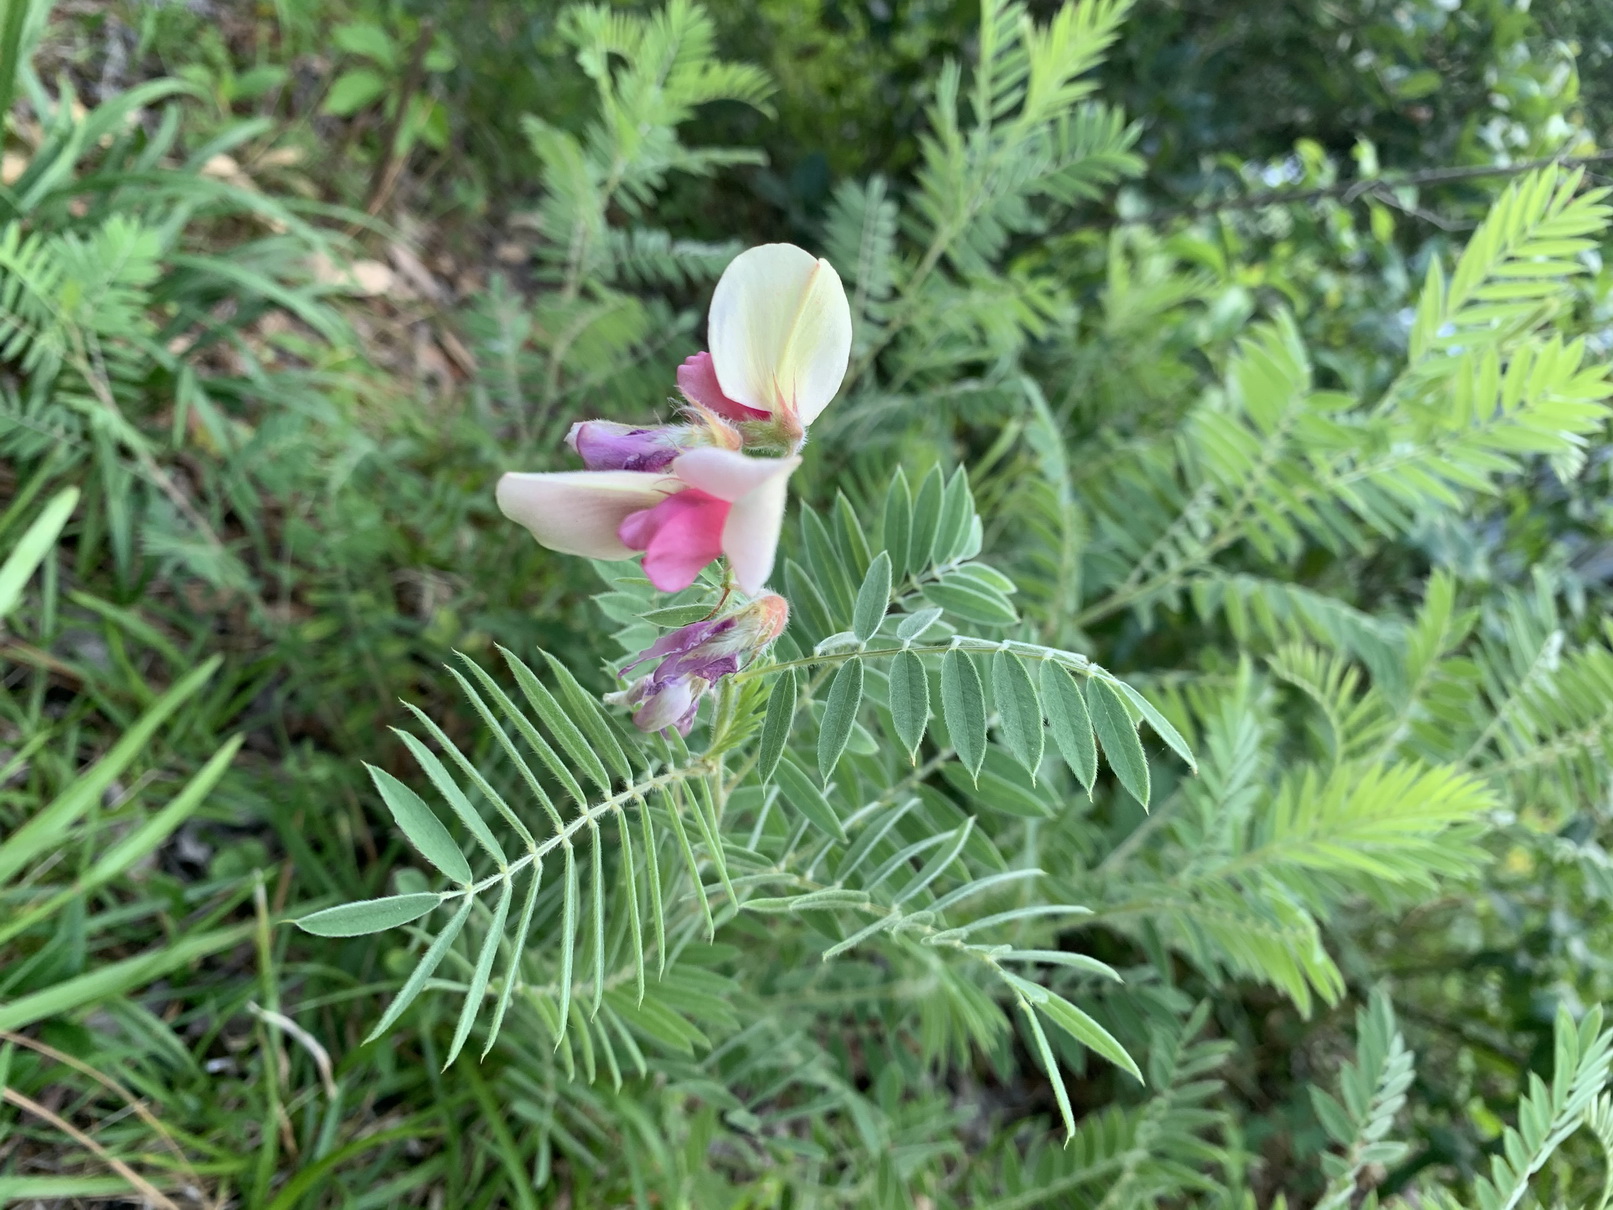 The Scientific Name is Tephrosia virginiana. You will likely hear them called Virginia Goat's-rue, Common Goat's-rue. This picture shows the terminal inflorescence, bicolored corolla (Weakley 2020) of Tephrosia virginiana